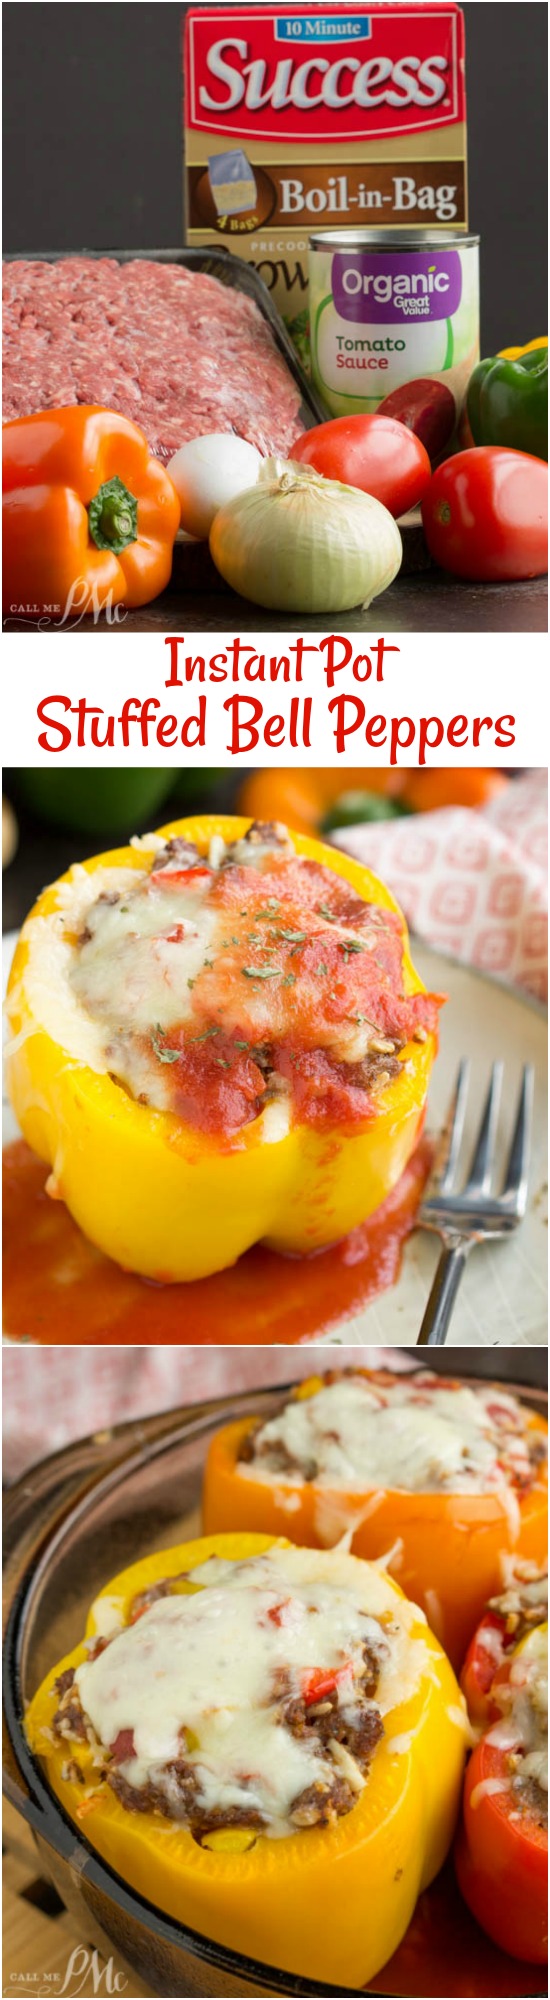 These delicious Instant Pot Stuffed Bell Peppers make a perfectly balanced meal of beef, rice, and vegetables. Using a pressure cooking to speed the process, this recipe can be on your table in 45 minutes.